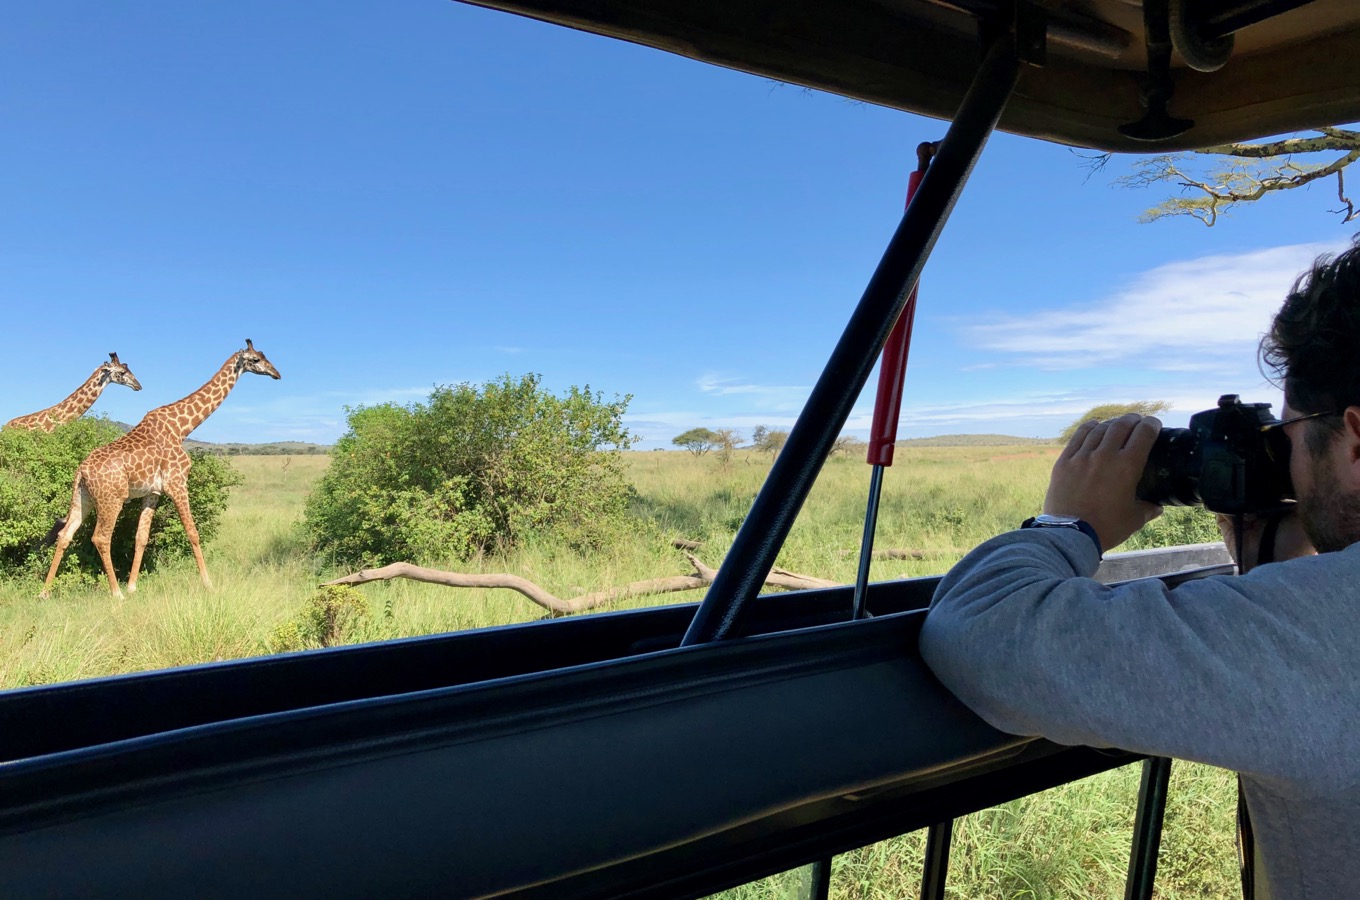 Observation of giraffes during a safari in the Serengeti